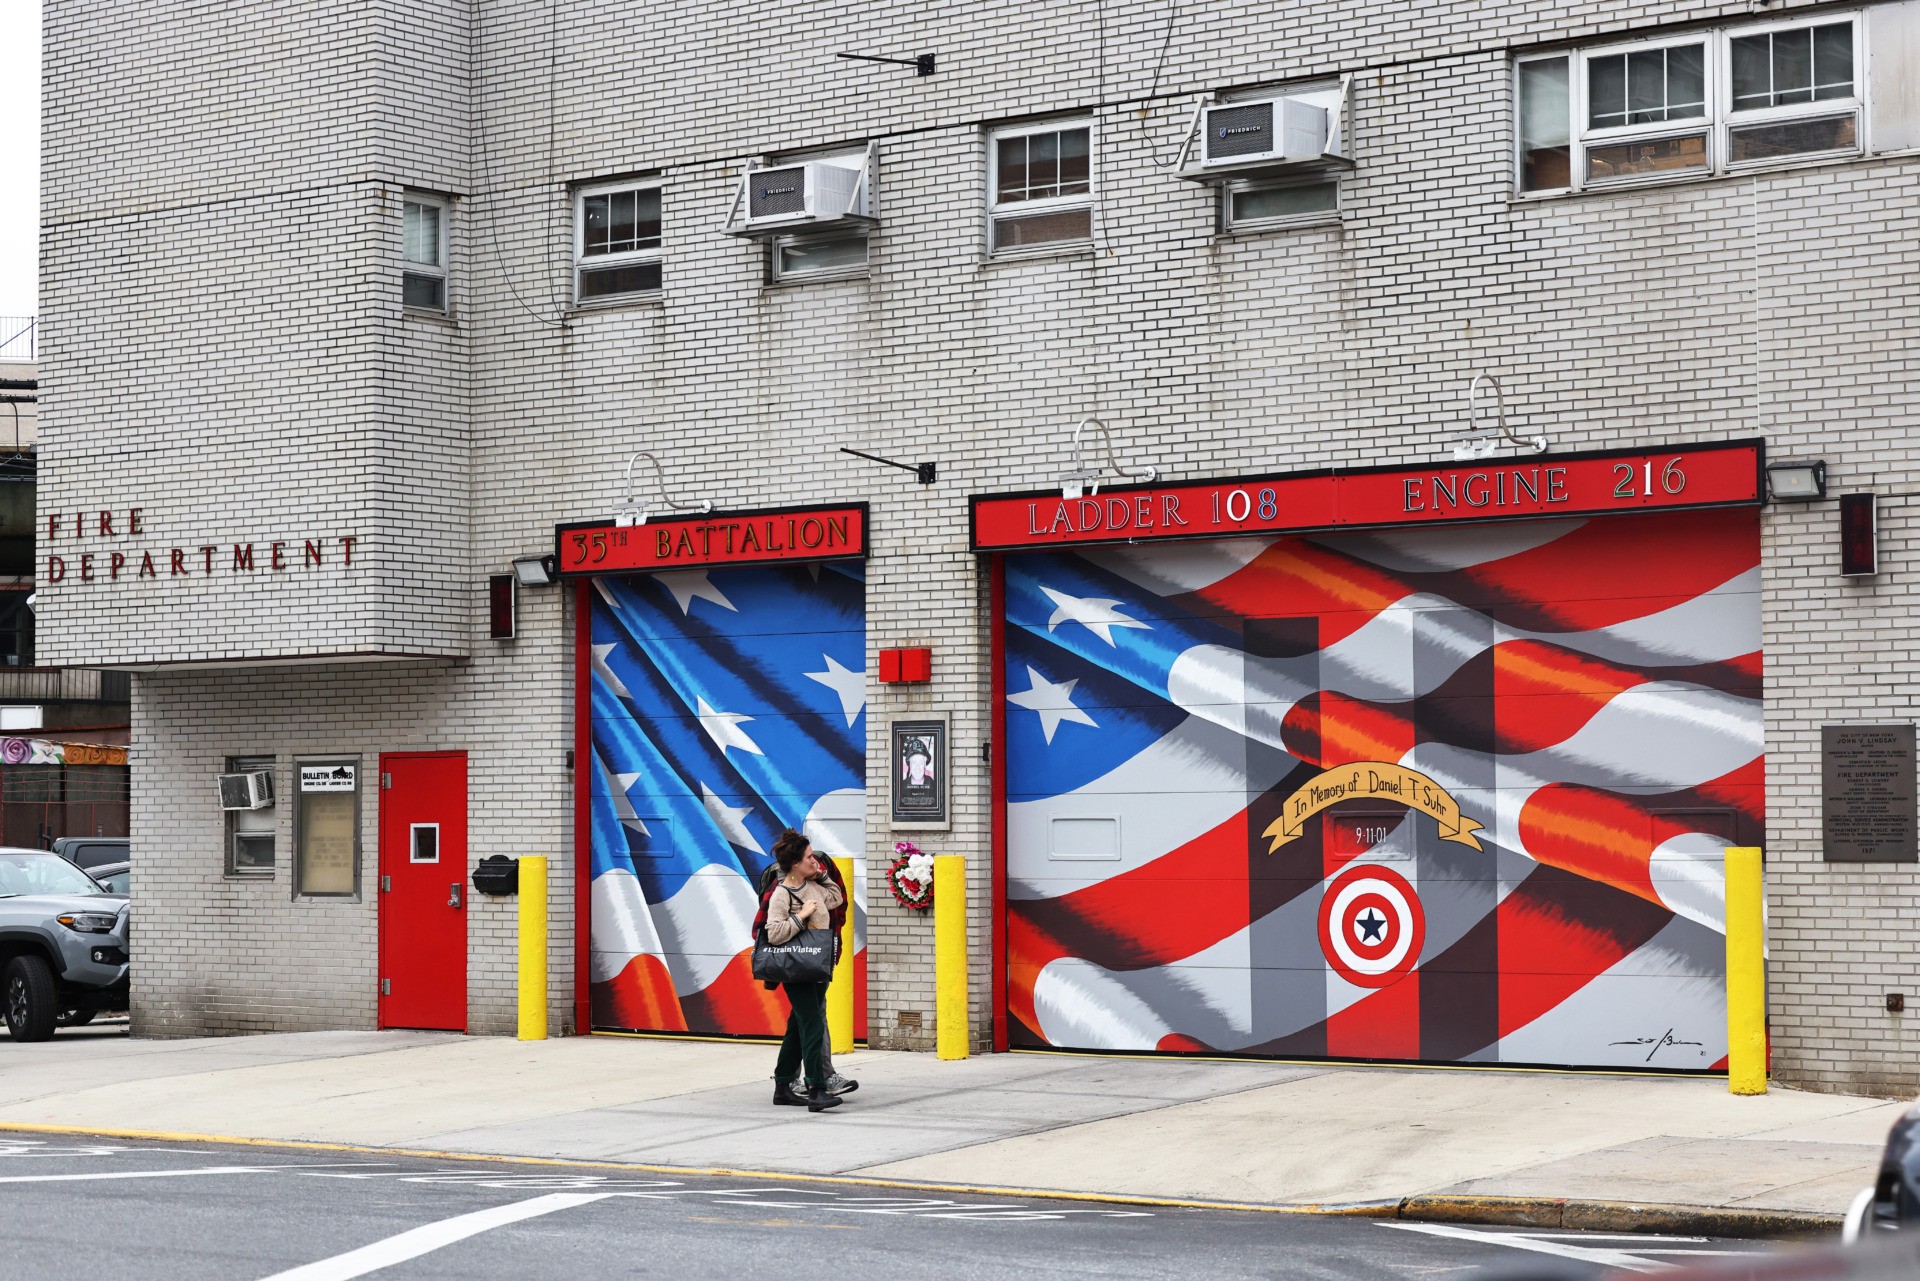 NEW YORK, NEW YORK - OCTOBER 29: People walk past the FDNY Engine Co. 216 station house on October 29, 2021 in the Williamsburg neighborhood of Brooklyn borough in New York City. According to the NYC Mayor's office, 86% of the city's 378,000 municipal workers have received at least one dose of the coronavirus (COVID-19) vaccine. The mayor has given municipal workers until 5 P.M. tonight to get vaccinated and has also eliminated the option to get tested weekly. Vaccination rates amongst city first responders are the lowest of all of the cities agencies. (Photo by Michael M. Santiago/Getty Images)